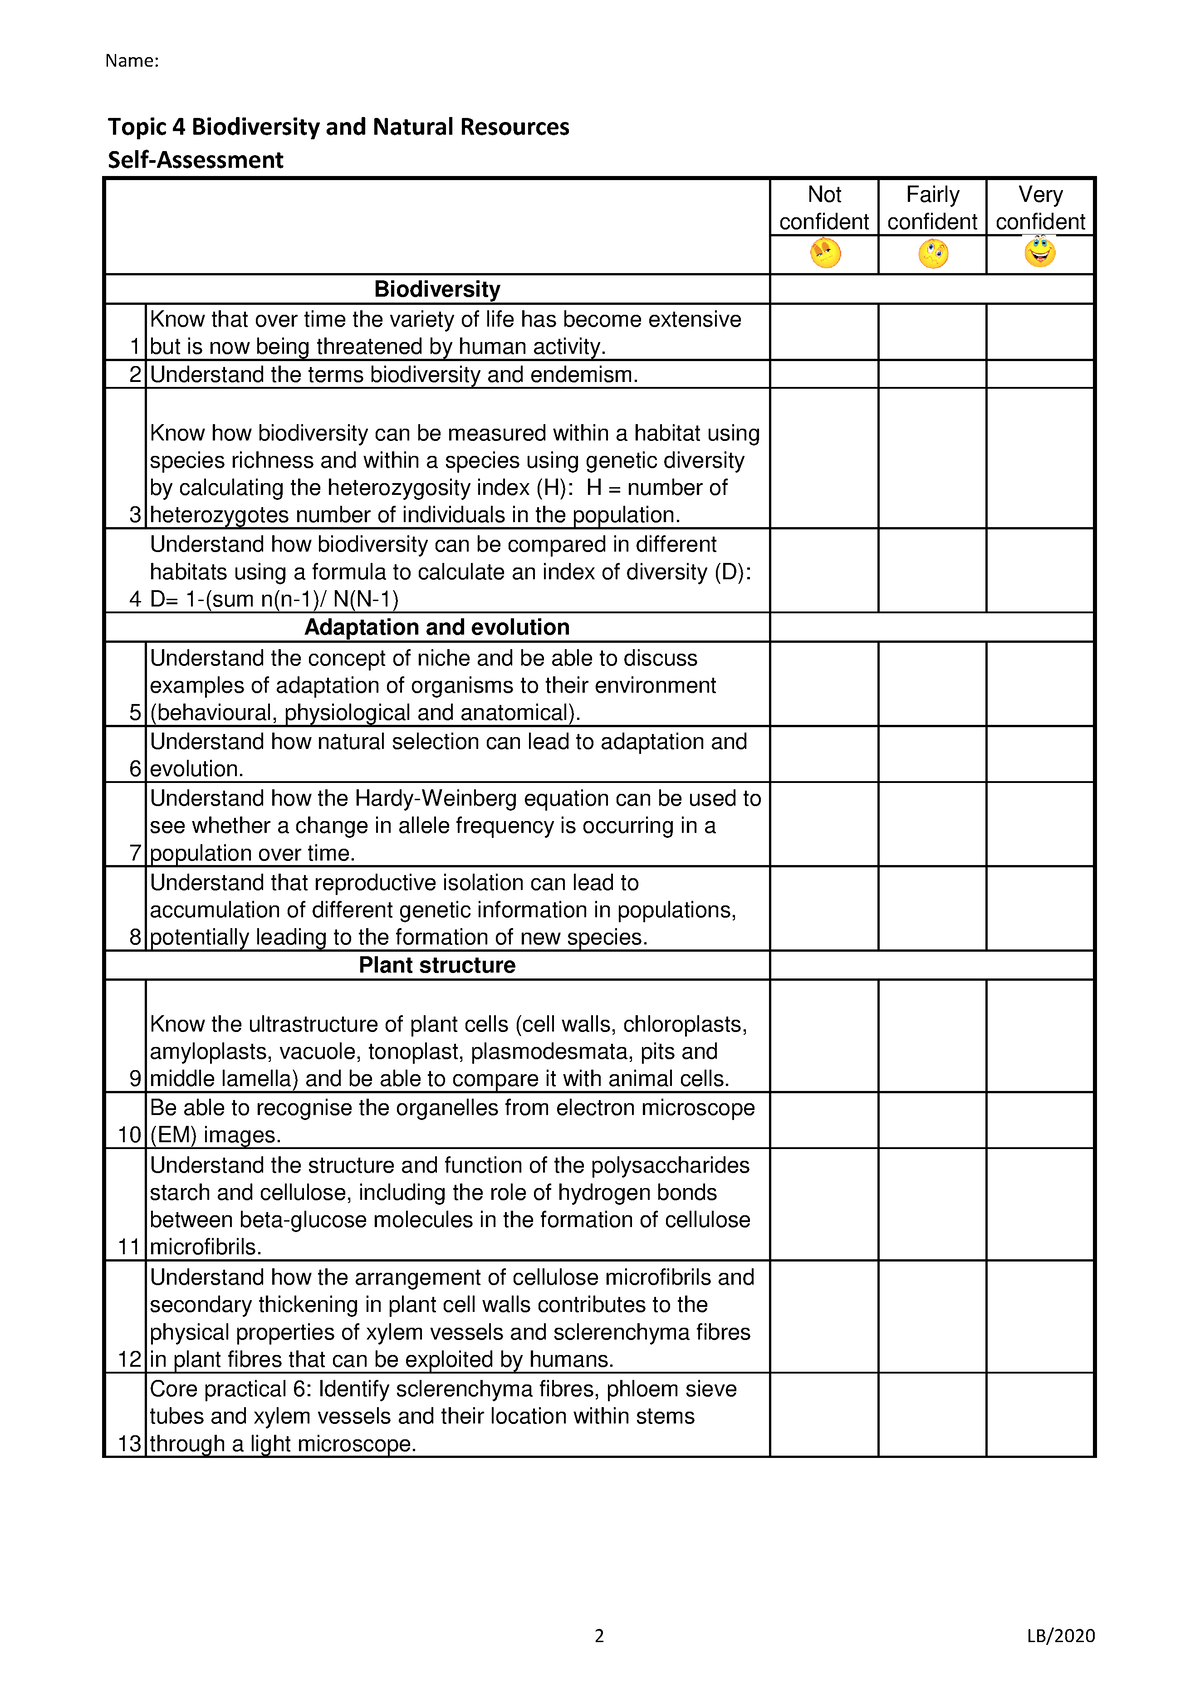 Topic 4 Student Learning Checklist - Name: Self-Assessment Not ...